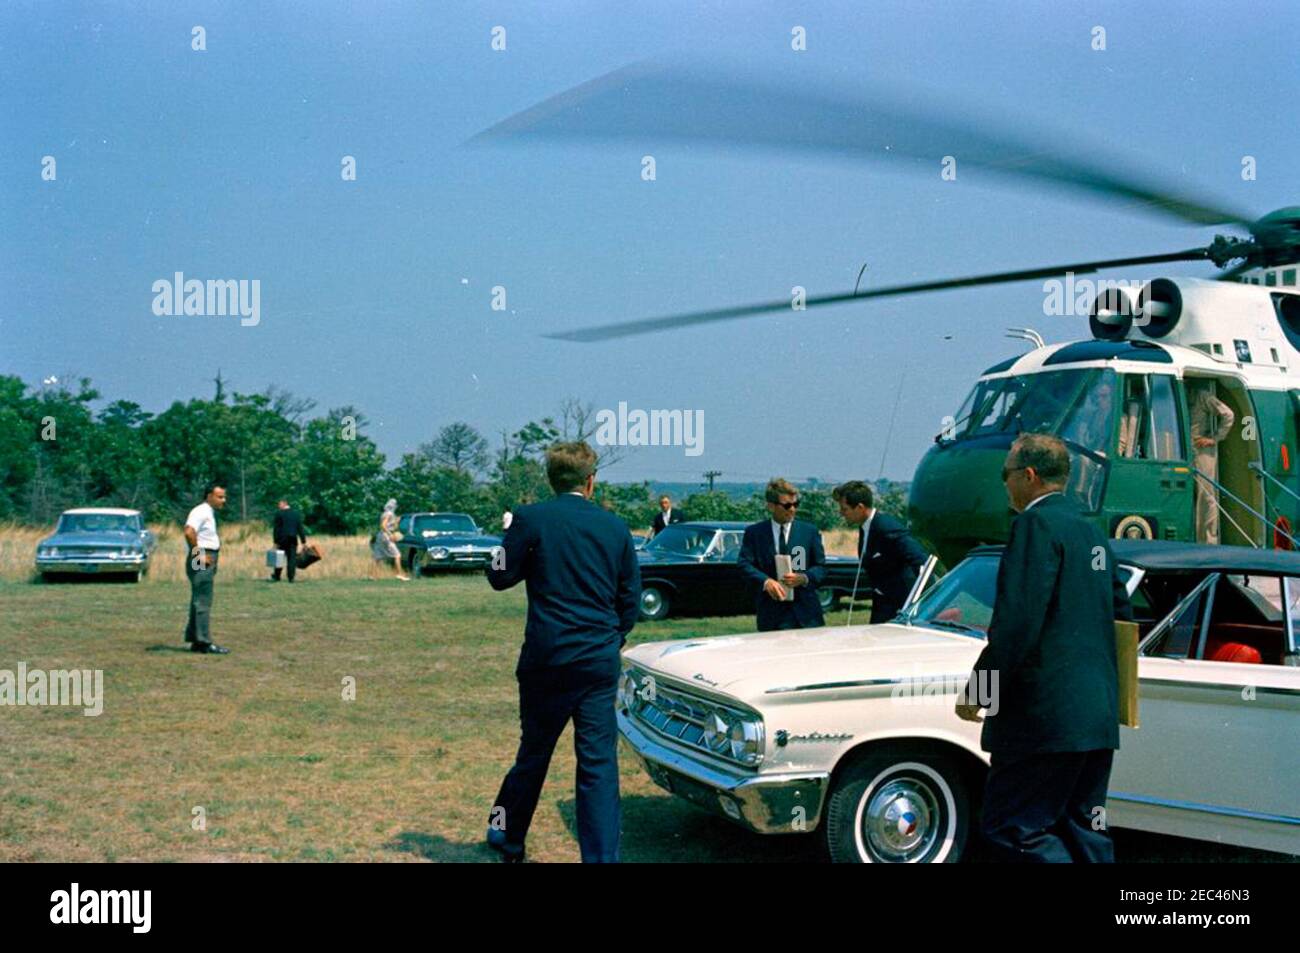 Trip to Hyannis Port: President Kennedy with Robert F. Kennedy (RFK) u0026 Edward M. Kennedy (EMK) at Otis Air Force Base Hospital. President John F. Kennedy (center, back turned), Attorney General Robert F. Kennedy (standing behind car, wearing sunglasses), and Senator Edward M. Kennedy of Massachusetts (right of the Attorney General) arrive at Otis Air Force Base; President Kennedy and his brothers traveled to Otis Air Force Base hospital following the death of the President and First Lady Jacqueline Kennedyu2019s newborn son, Patrick Bouvier Kennedy. Also pictured: Secret Service agents, Stock Photo